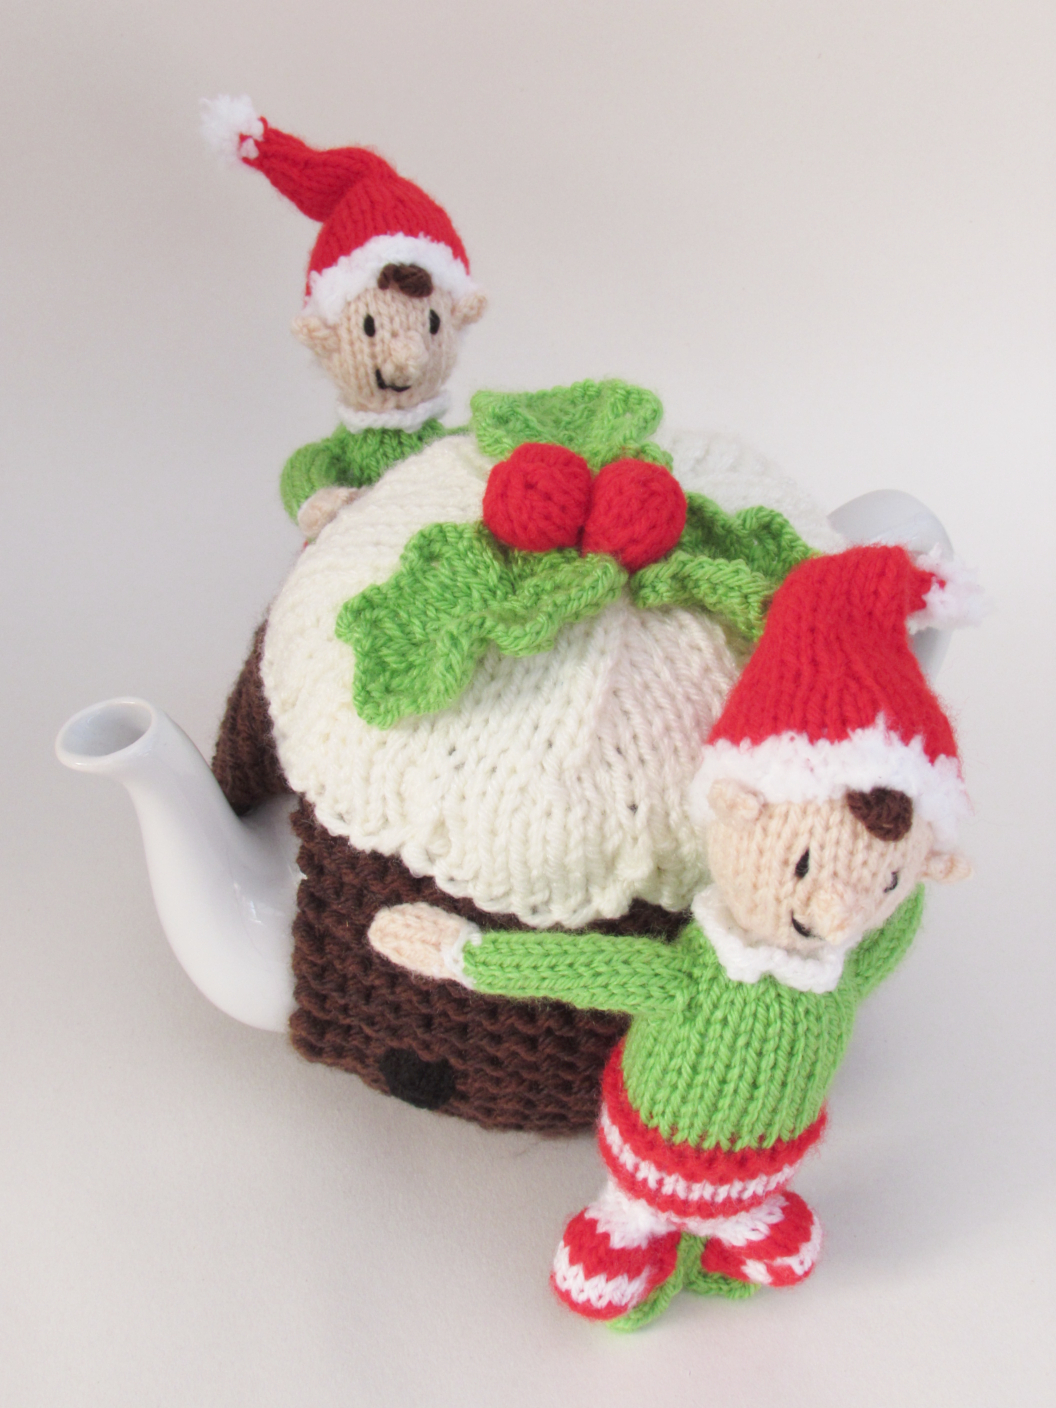 Tea Cosy Knitting Patterns from tea cosy folk, learn how